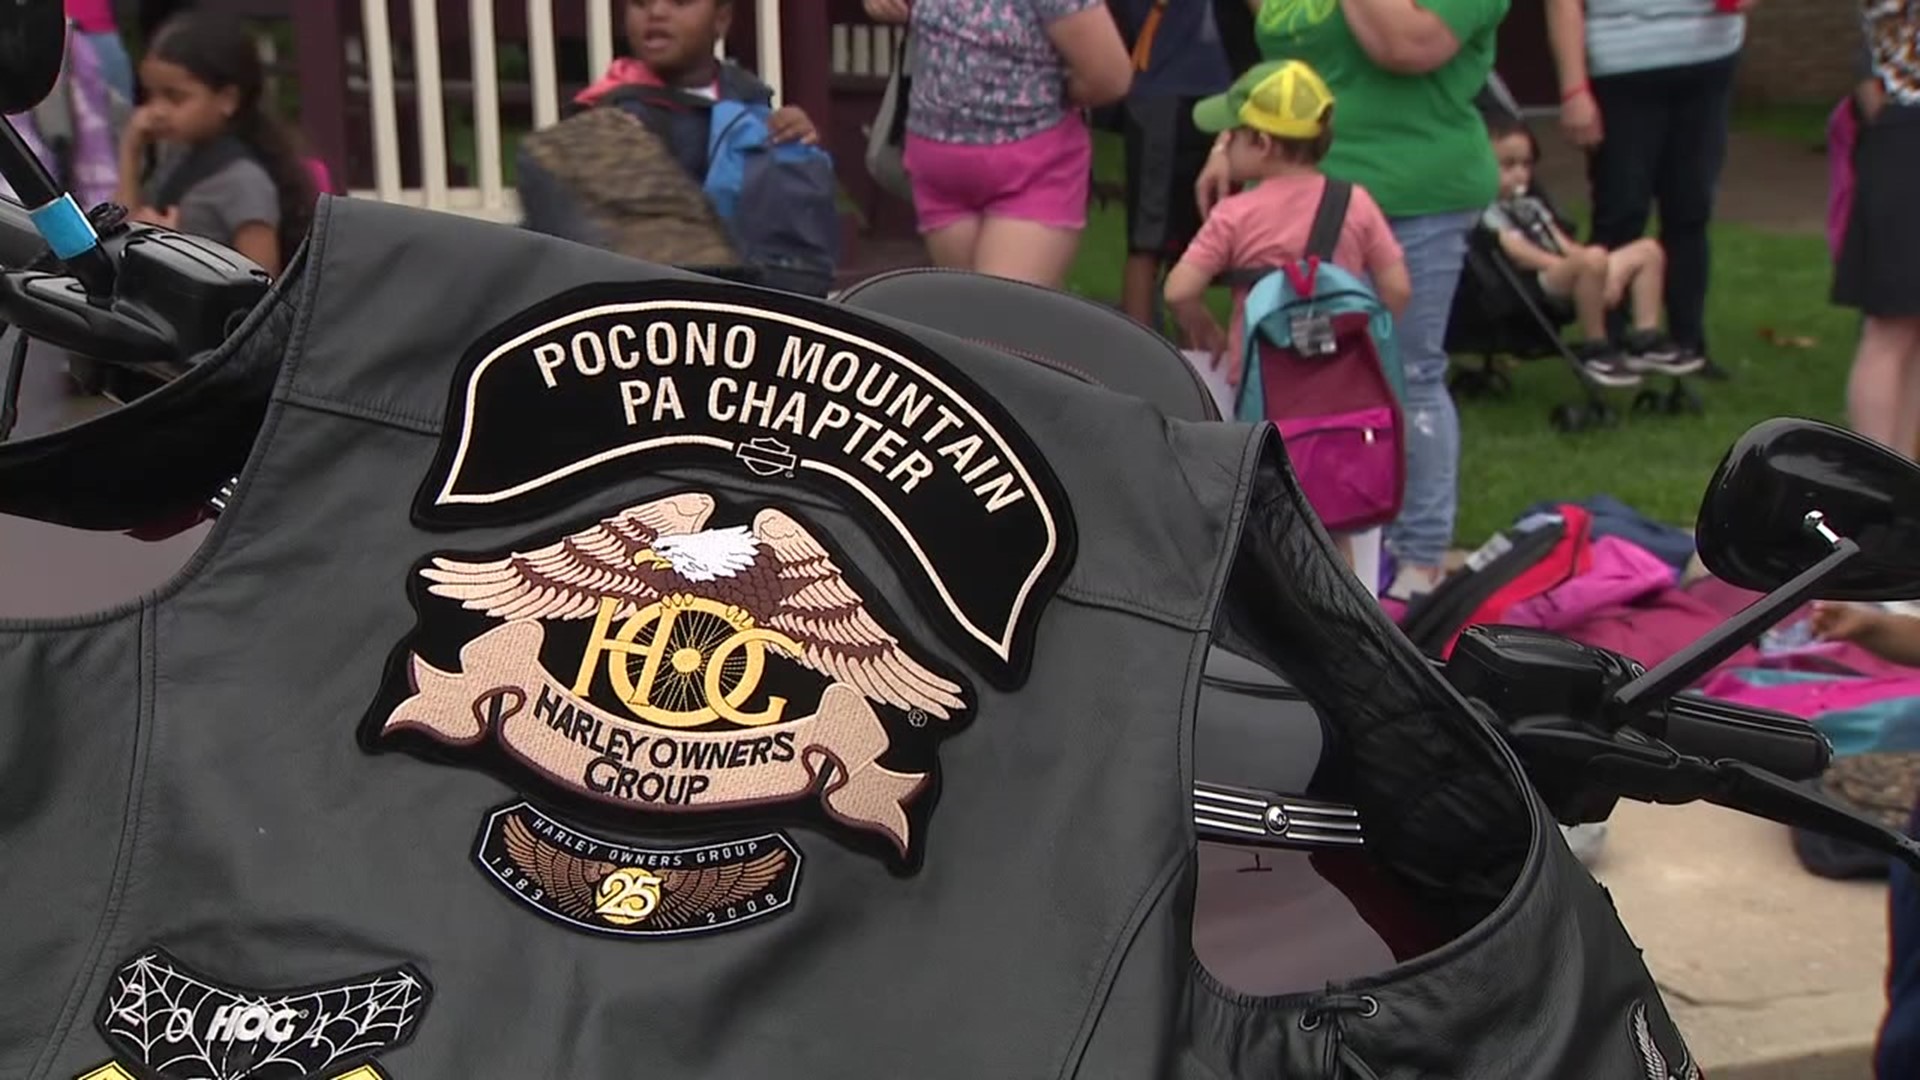 The annual Bikers for Backpacks giveaway is organized by the Pocono Mountain Harley Owners Group.